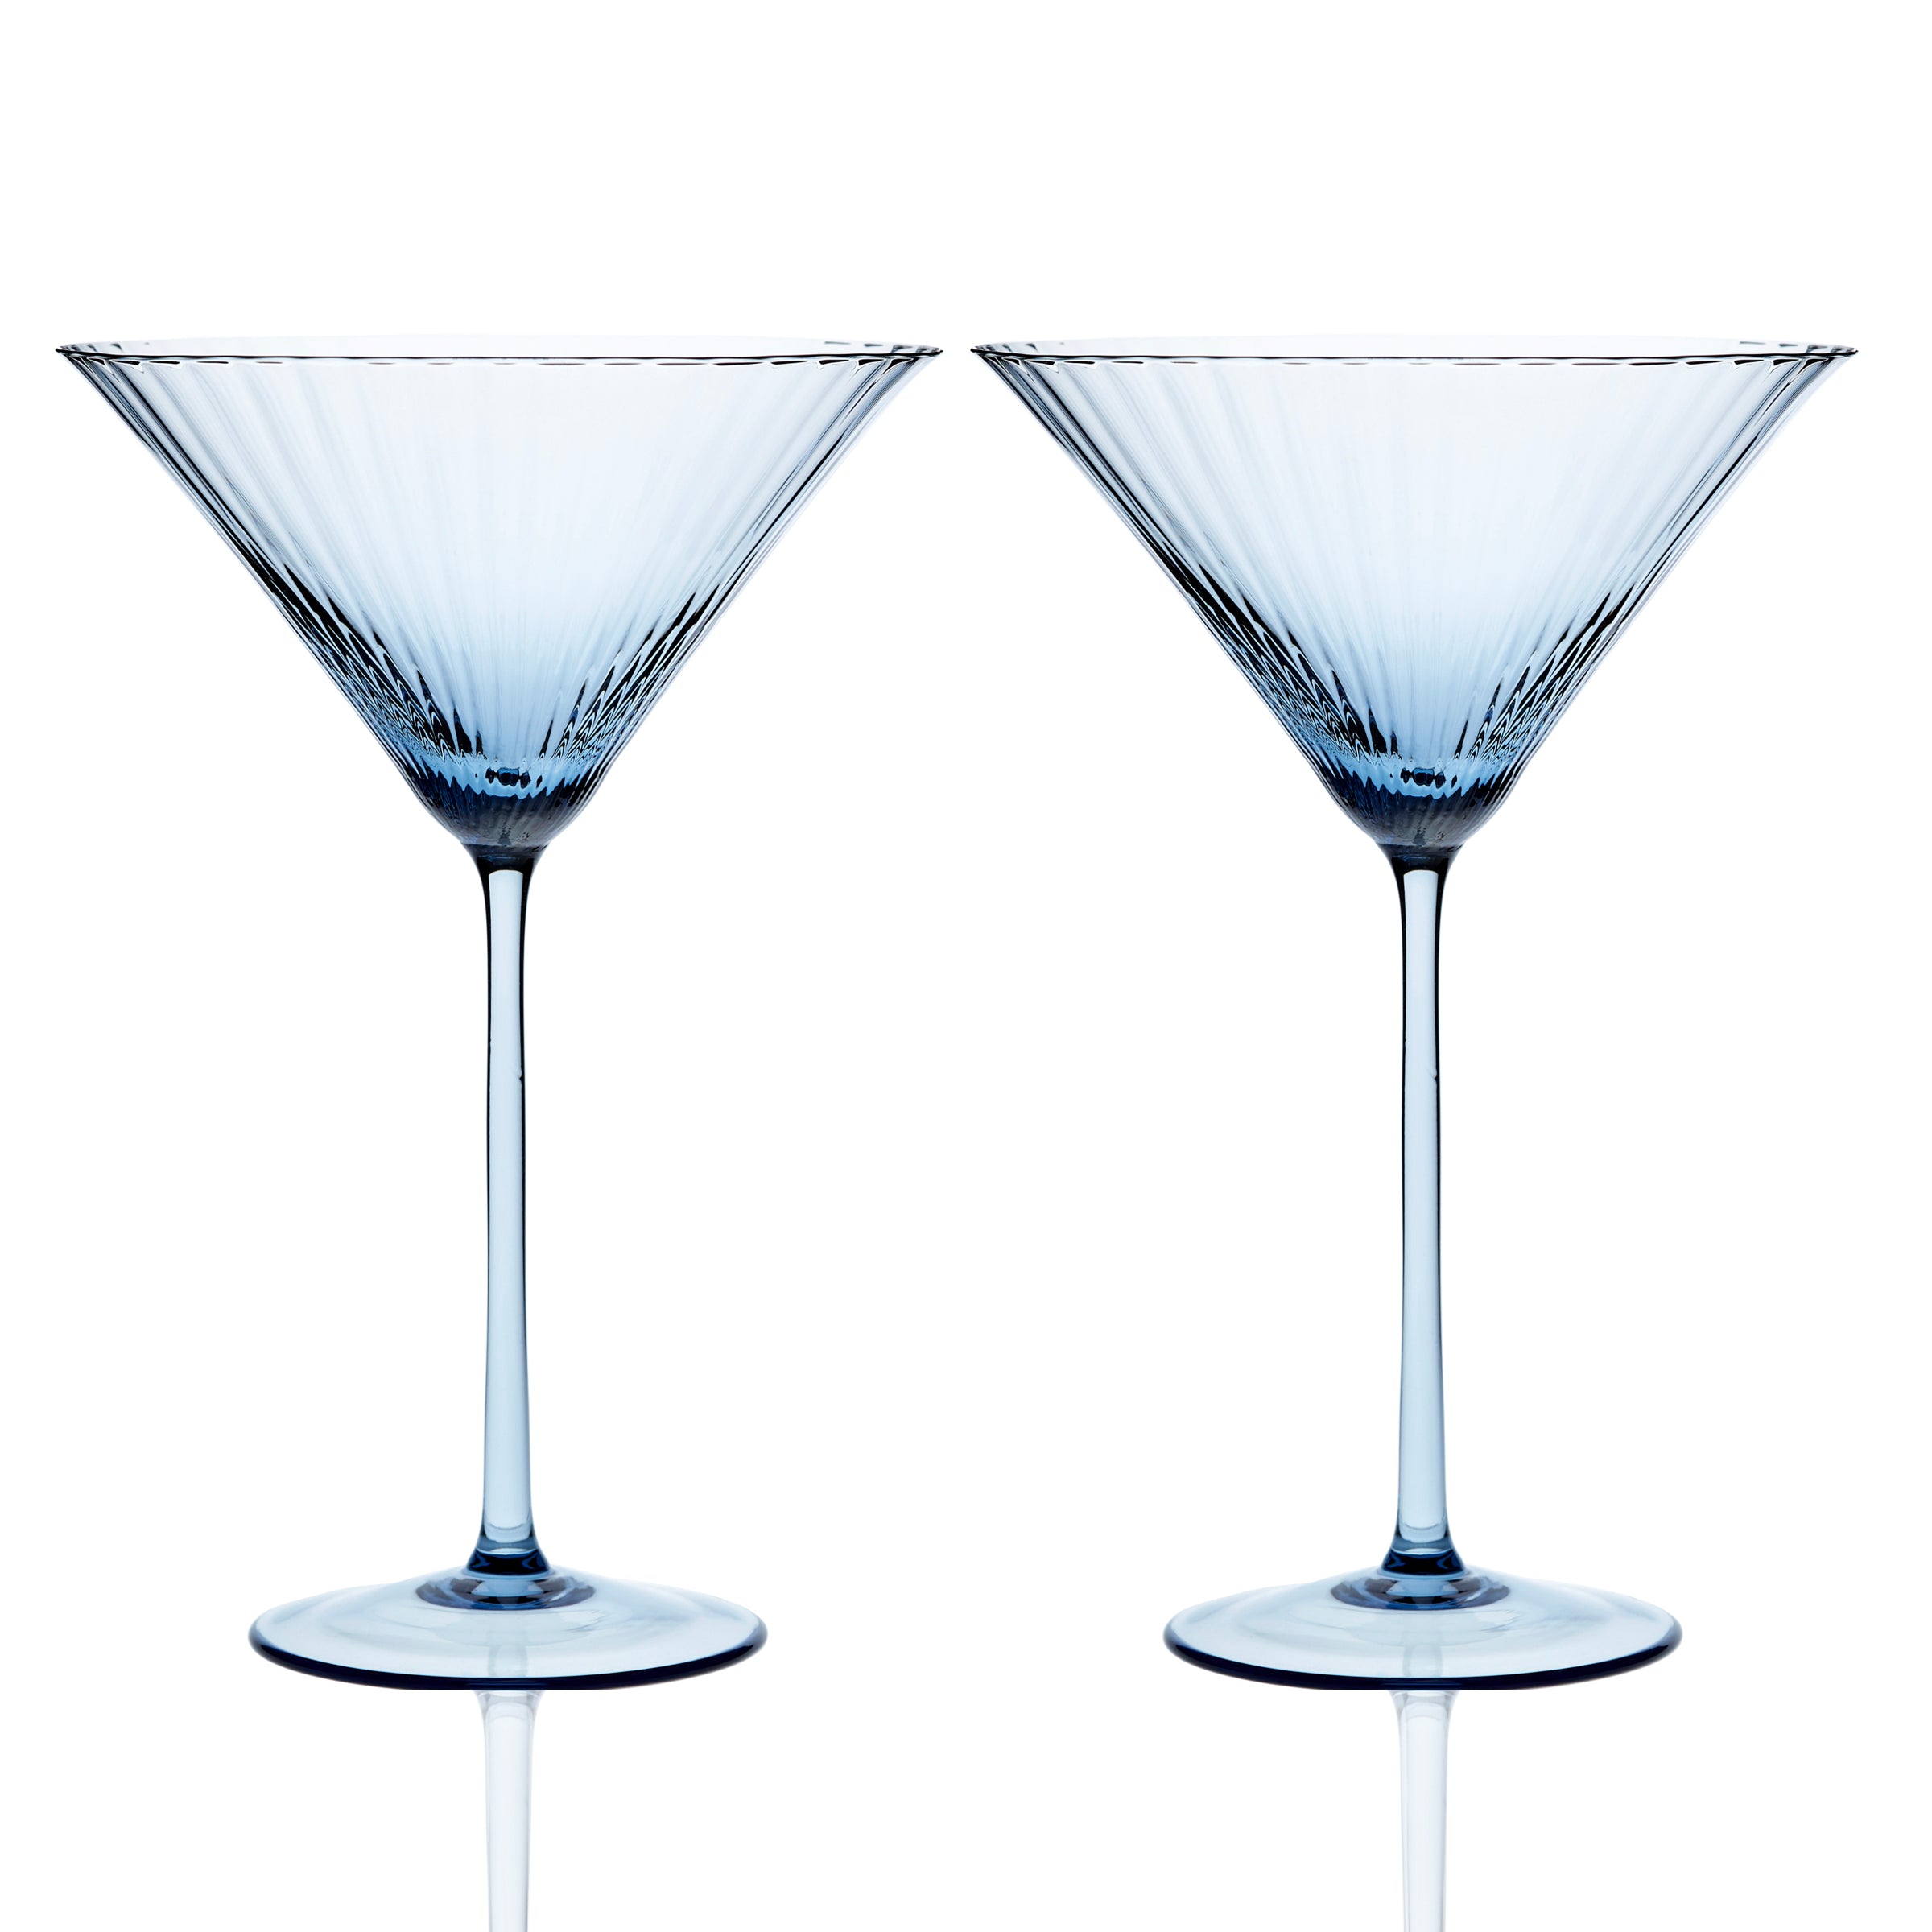  Martini Glass Candle Holder with Blue Stem and Hand